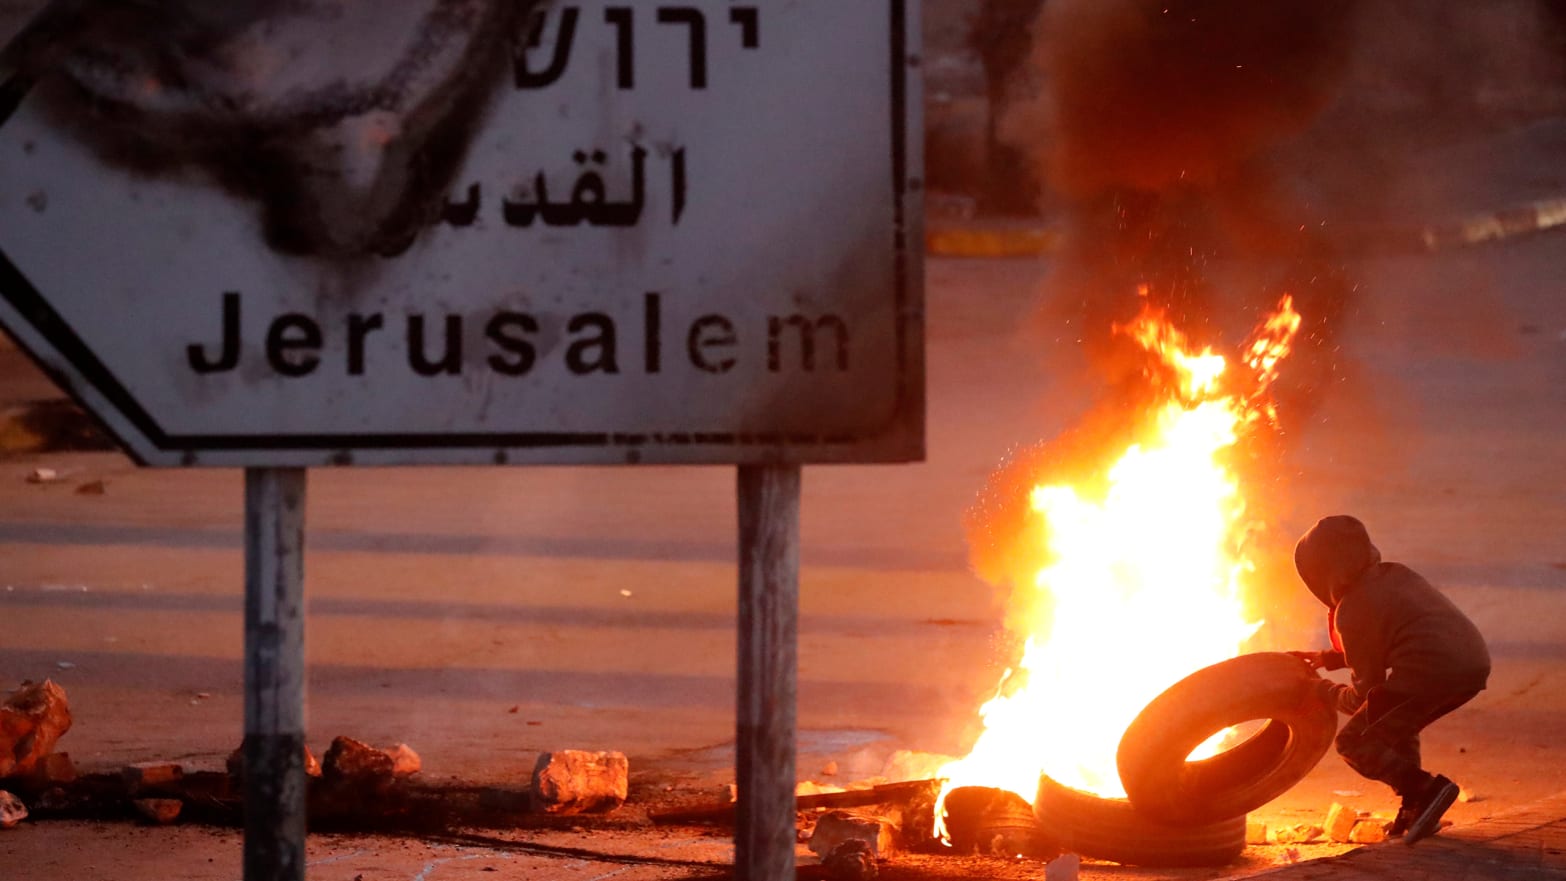 A Palestinian protester sets up a burning barricade near the West Bank city of Ramallah December 8, 2017.